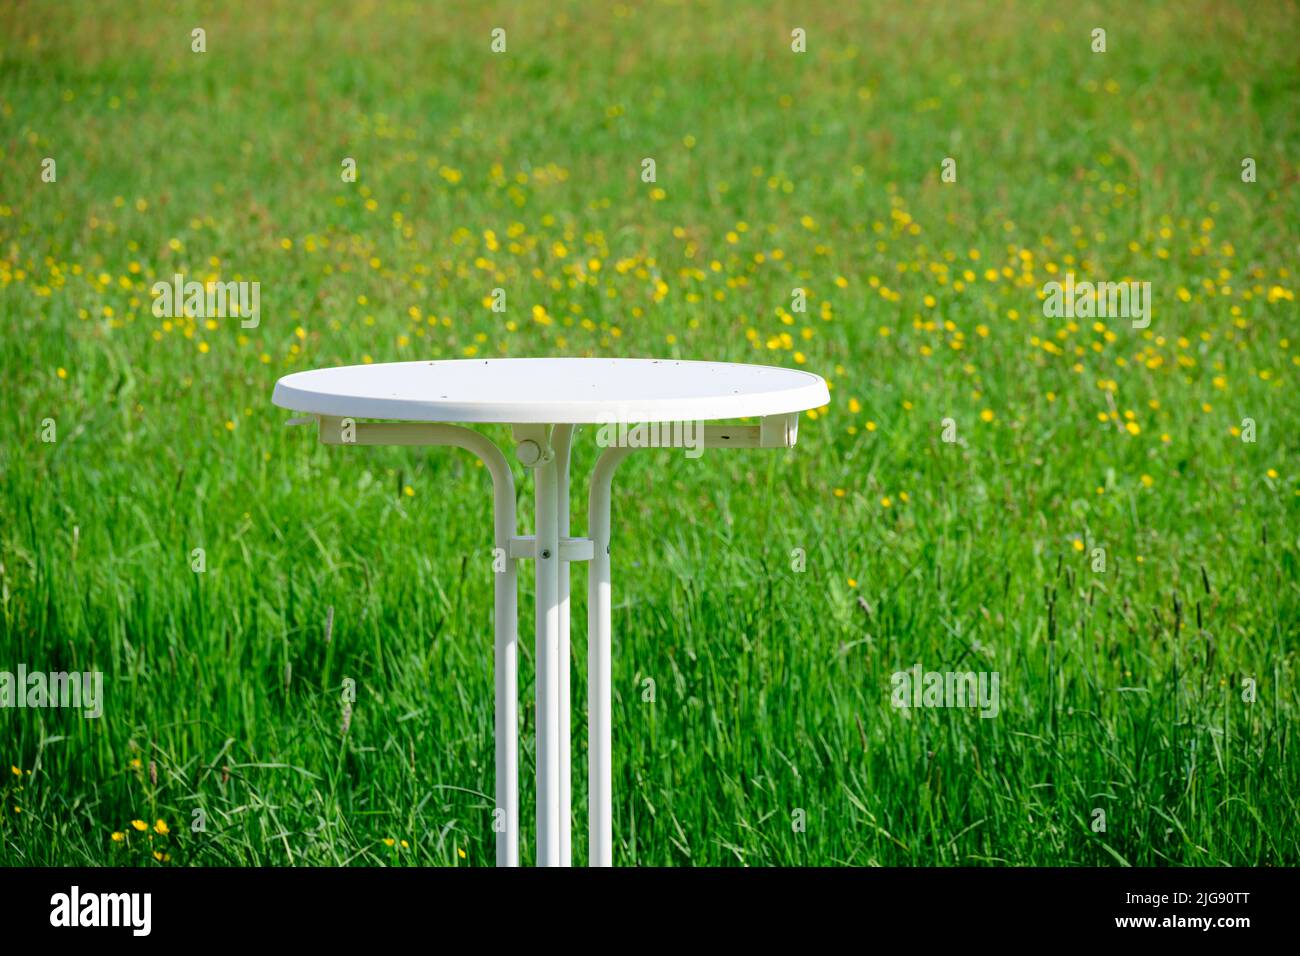 Germany, Baden-Württemberg, bar table at a meadow. Stock Photo